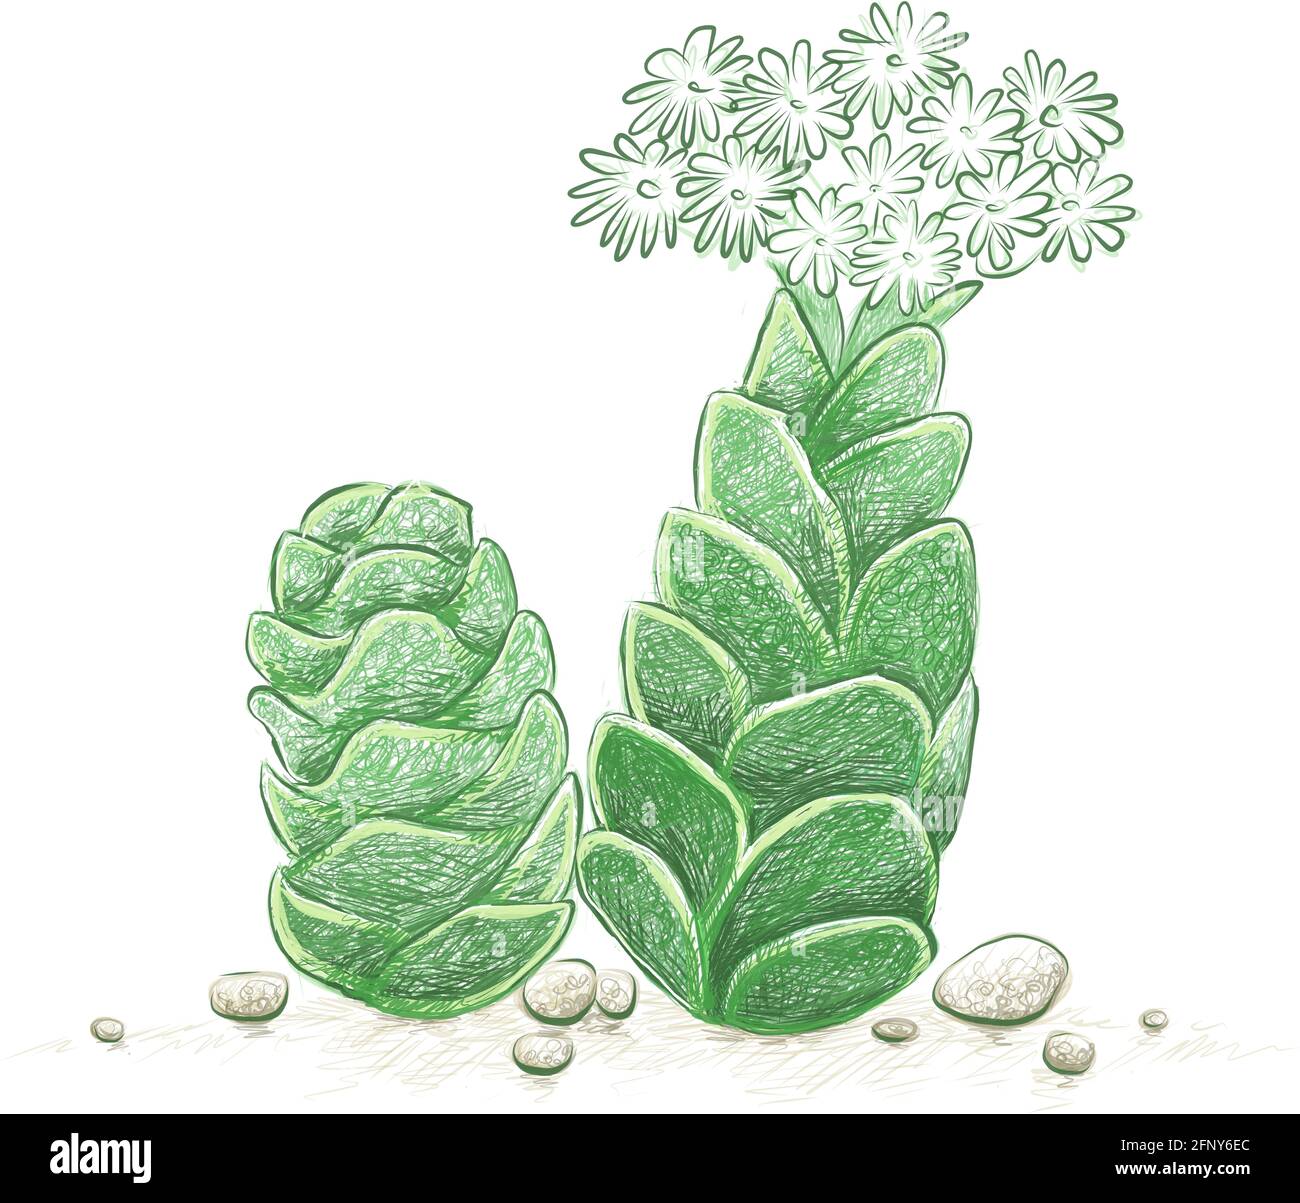 Illustration Hand Drawn Sketch of Crassula Barklyi or Rattlesnake Tail Succulents Plant. A Succulent Plants for Garden Decoration. Stock Vector